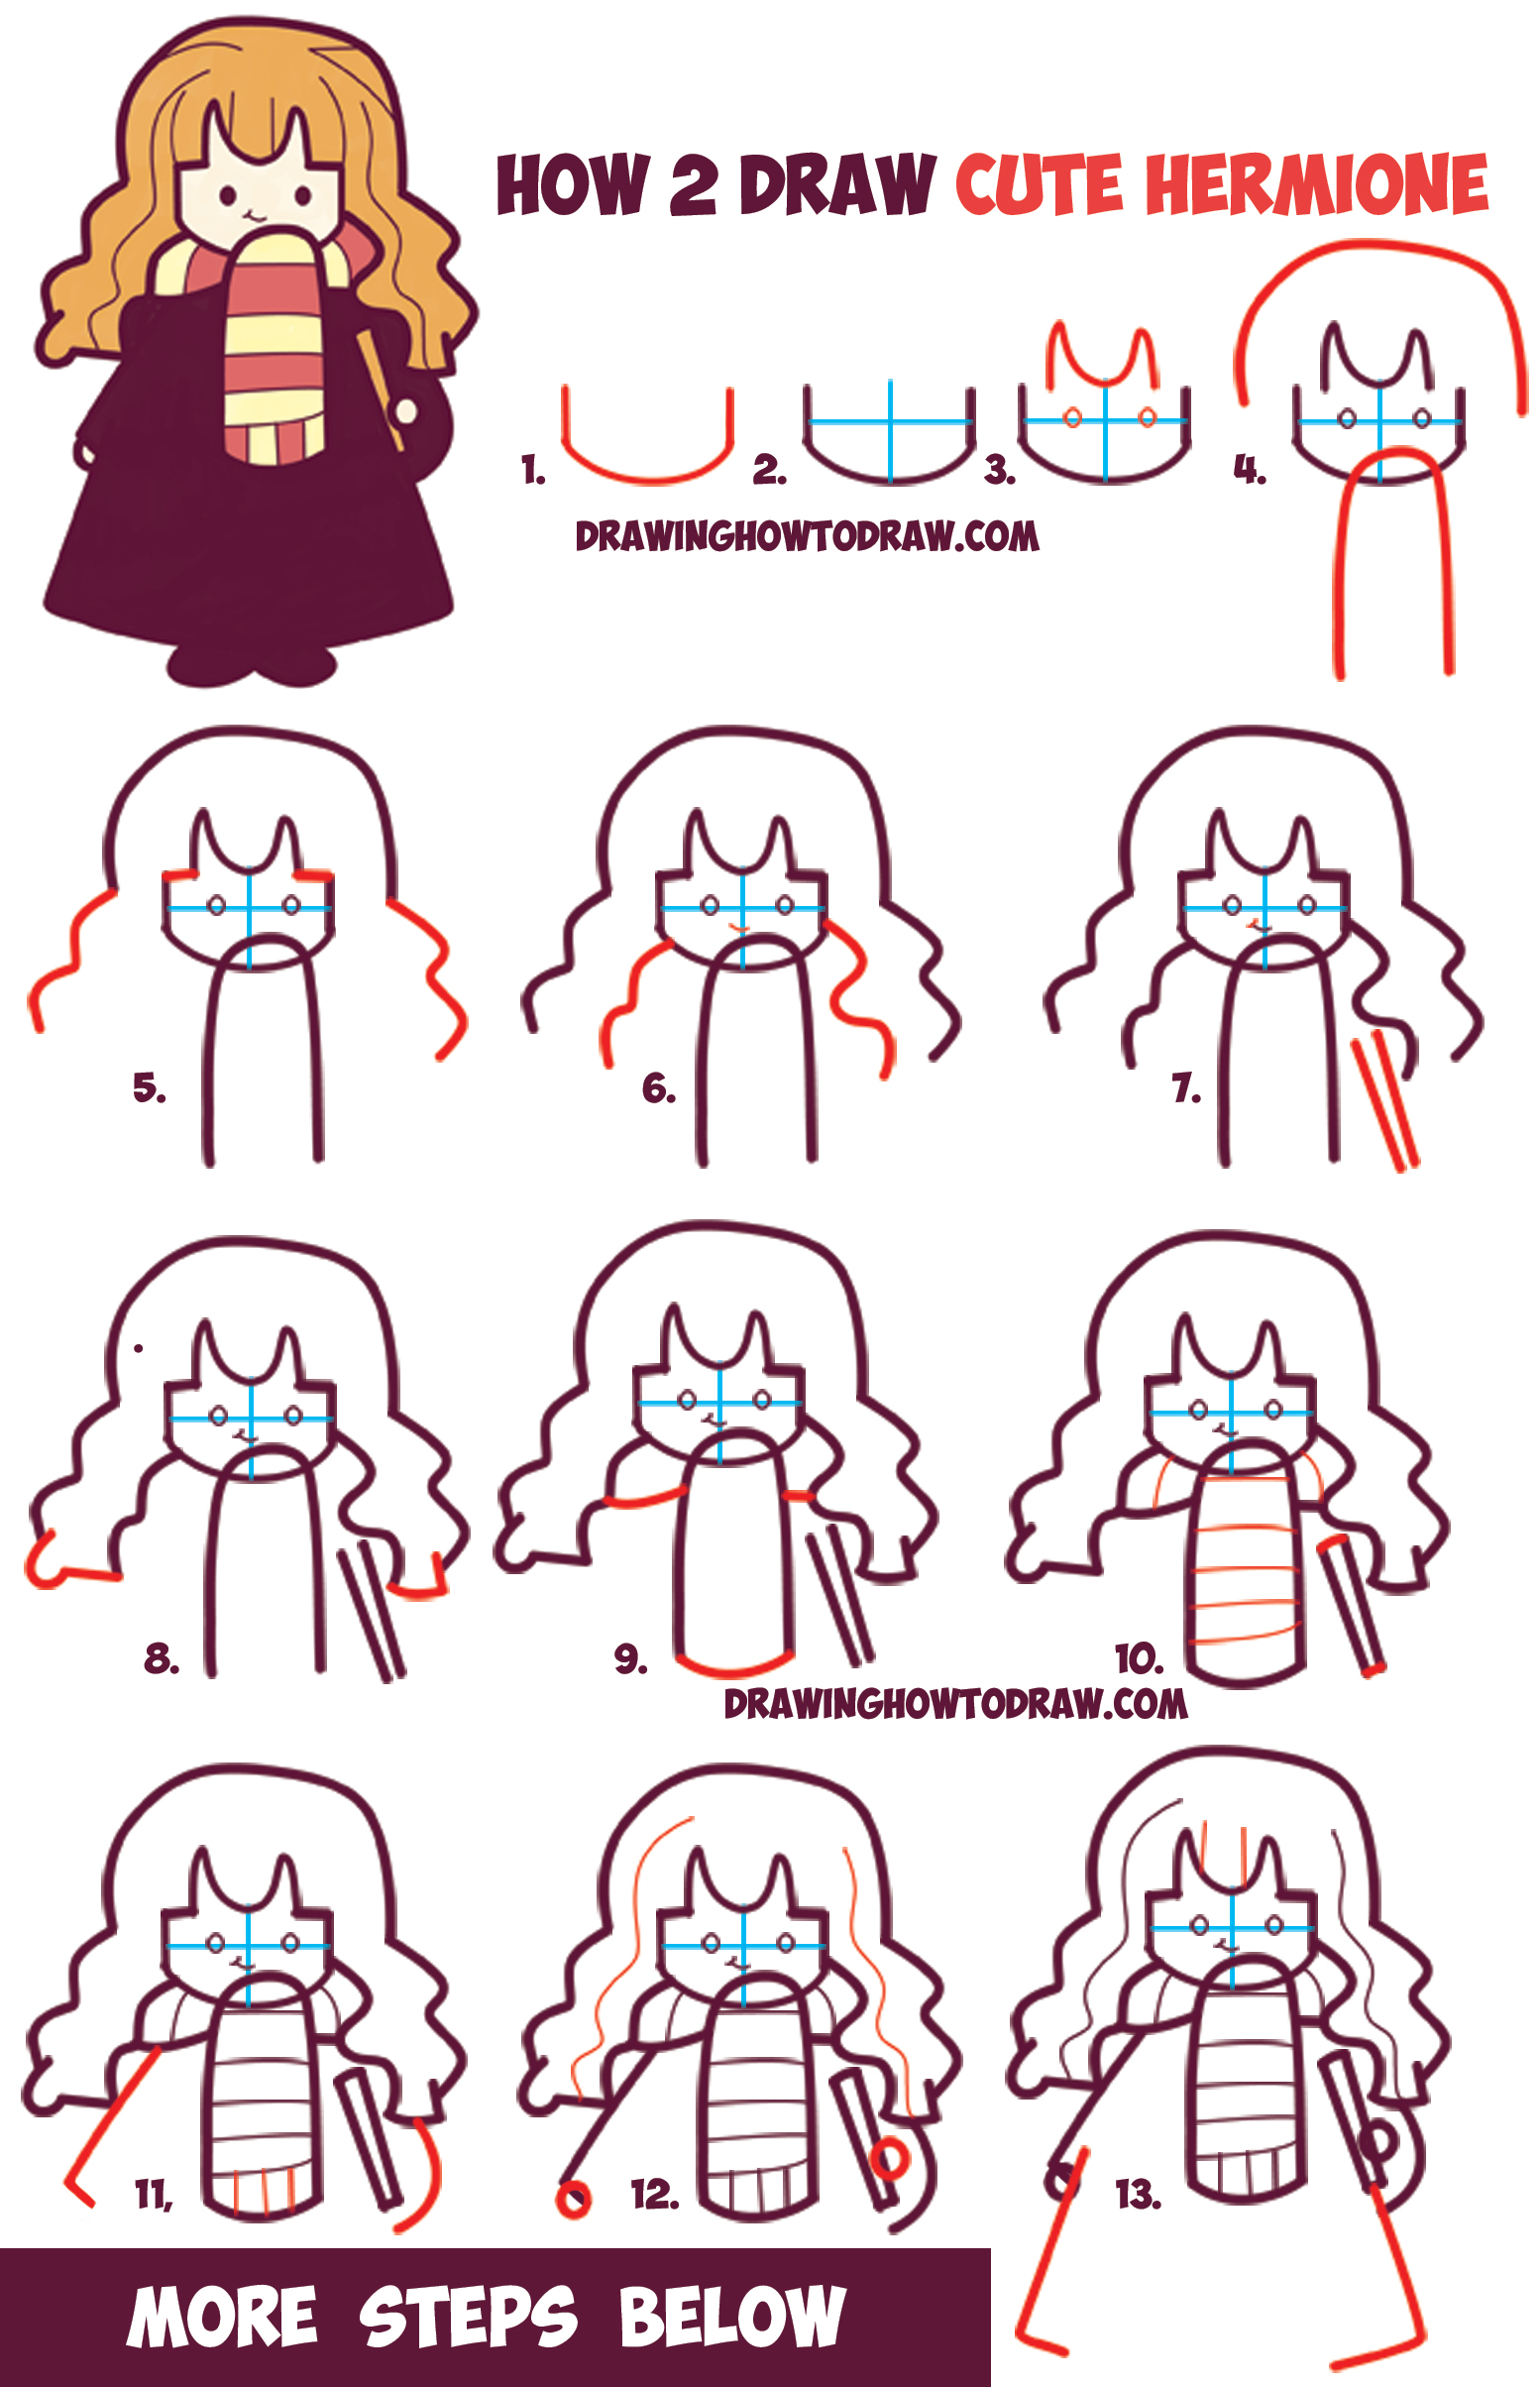 How to Draw Cute Hermione from Harry Potter (Chibi / Kawaii) Easy Steps